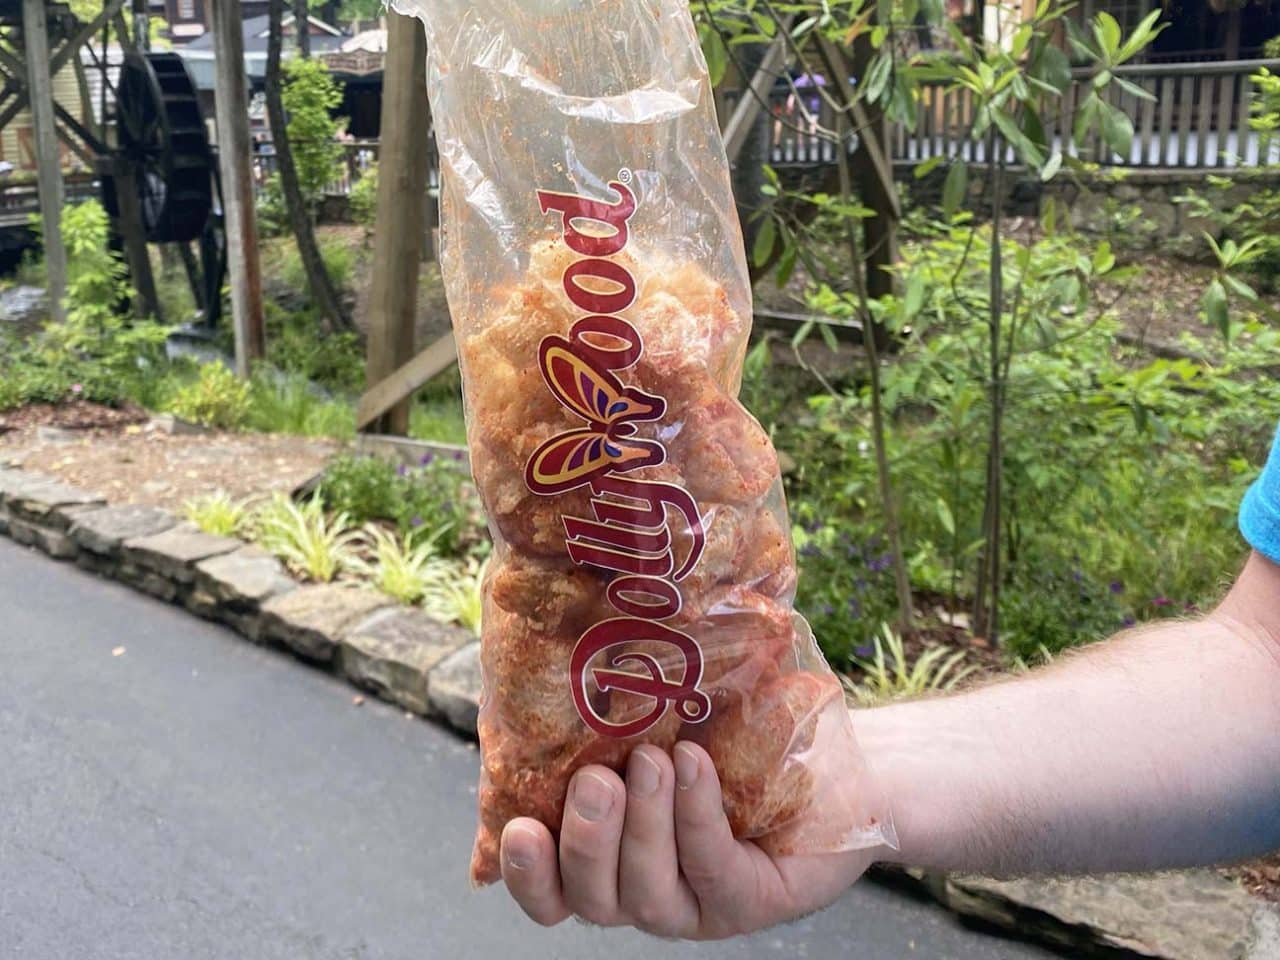 Best Things to do at Dollywood: Enjoy pork rinds made right before your eyes.